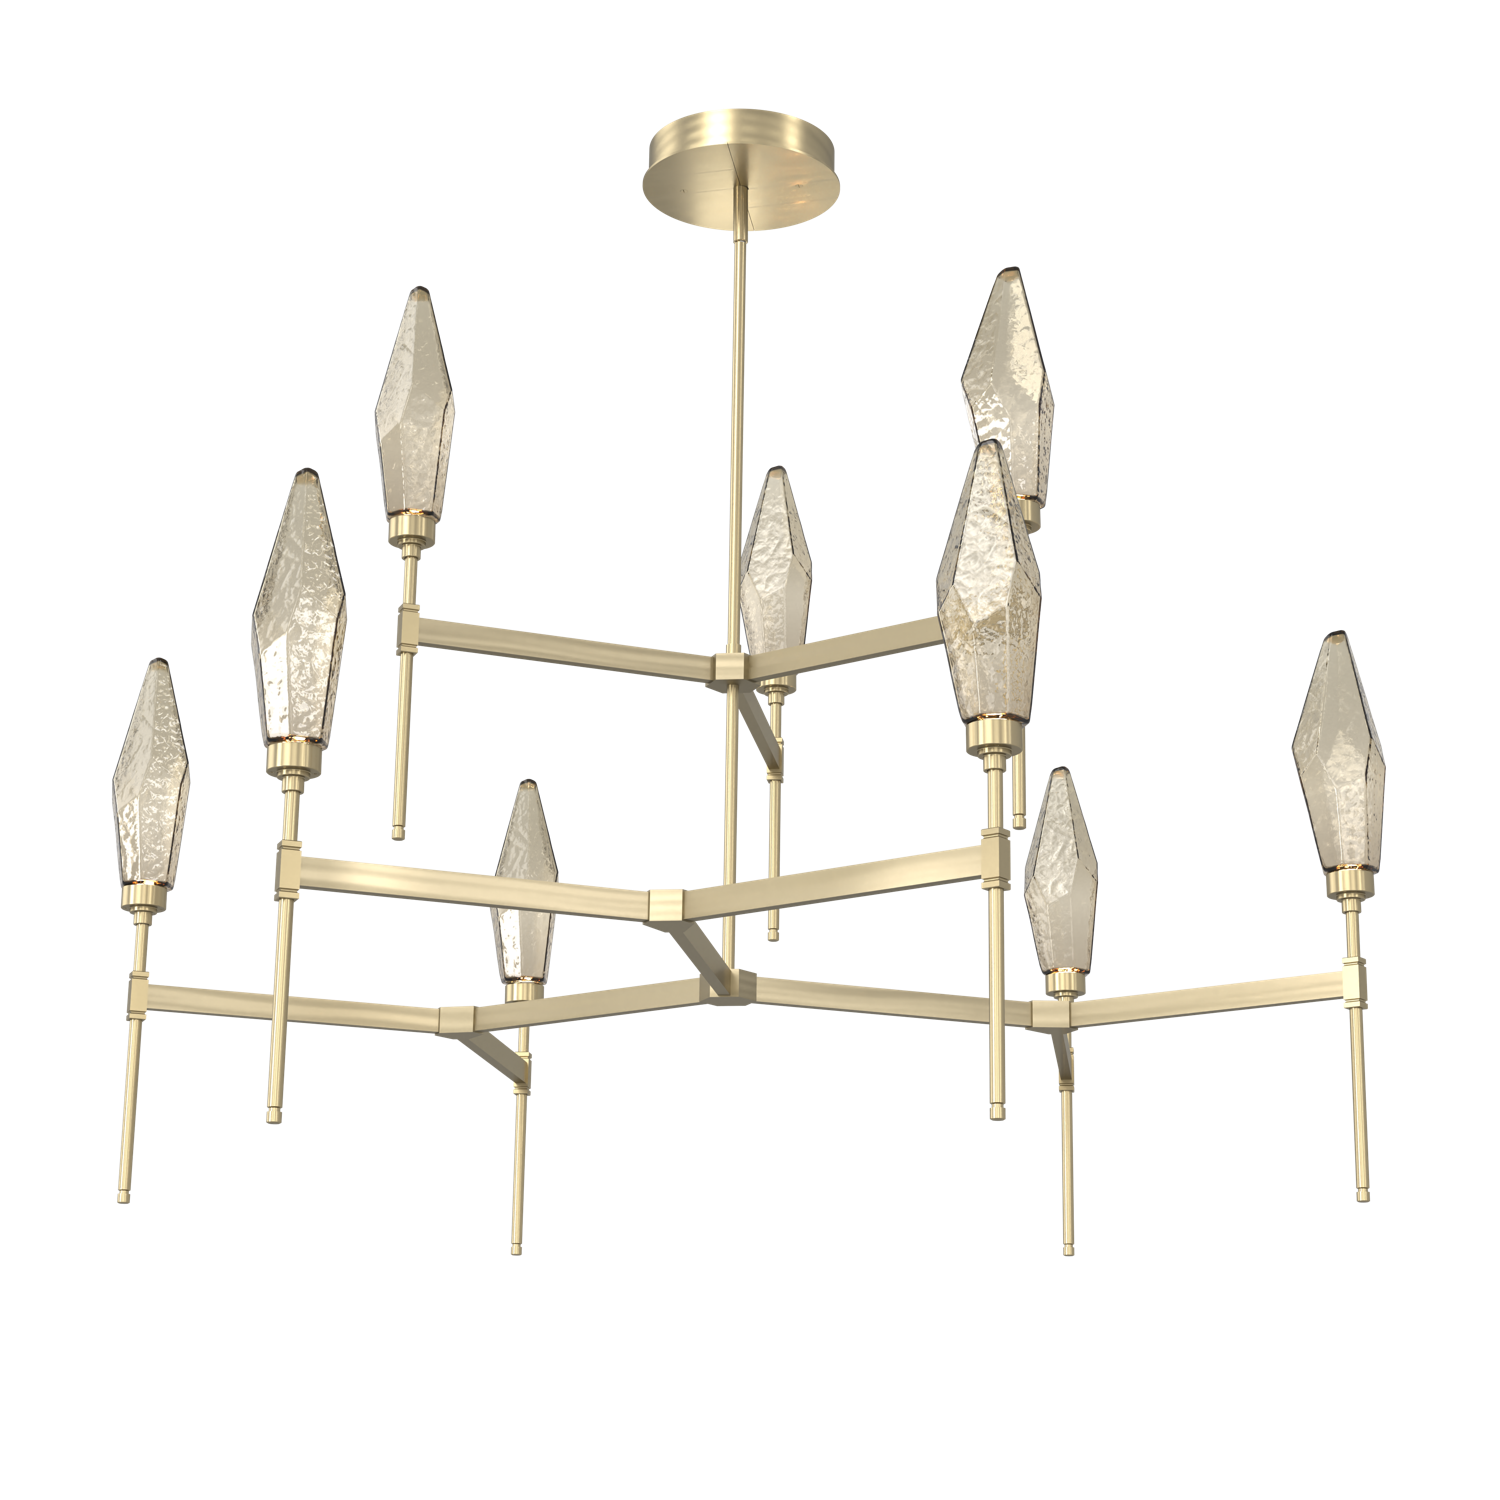 CHB0050-54-HB-CB-Hammerton-Studio-Rock-Crystal-54-inch-round-two-tier-belvedere-chandelier-with-heritage-brass-finish-and-chilled-bronze-blown-glass-shades-and-LED-lamping